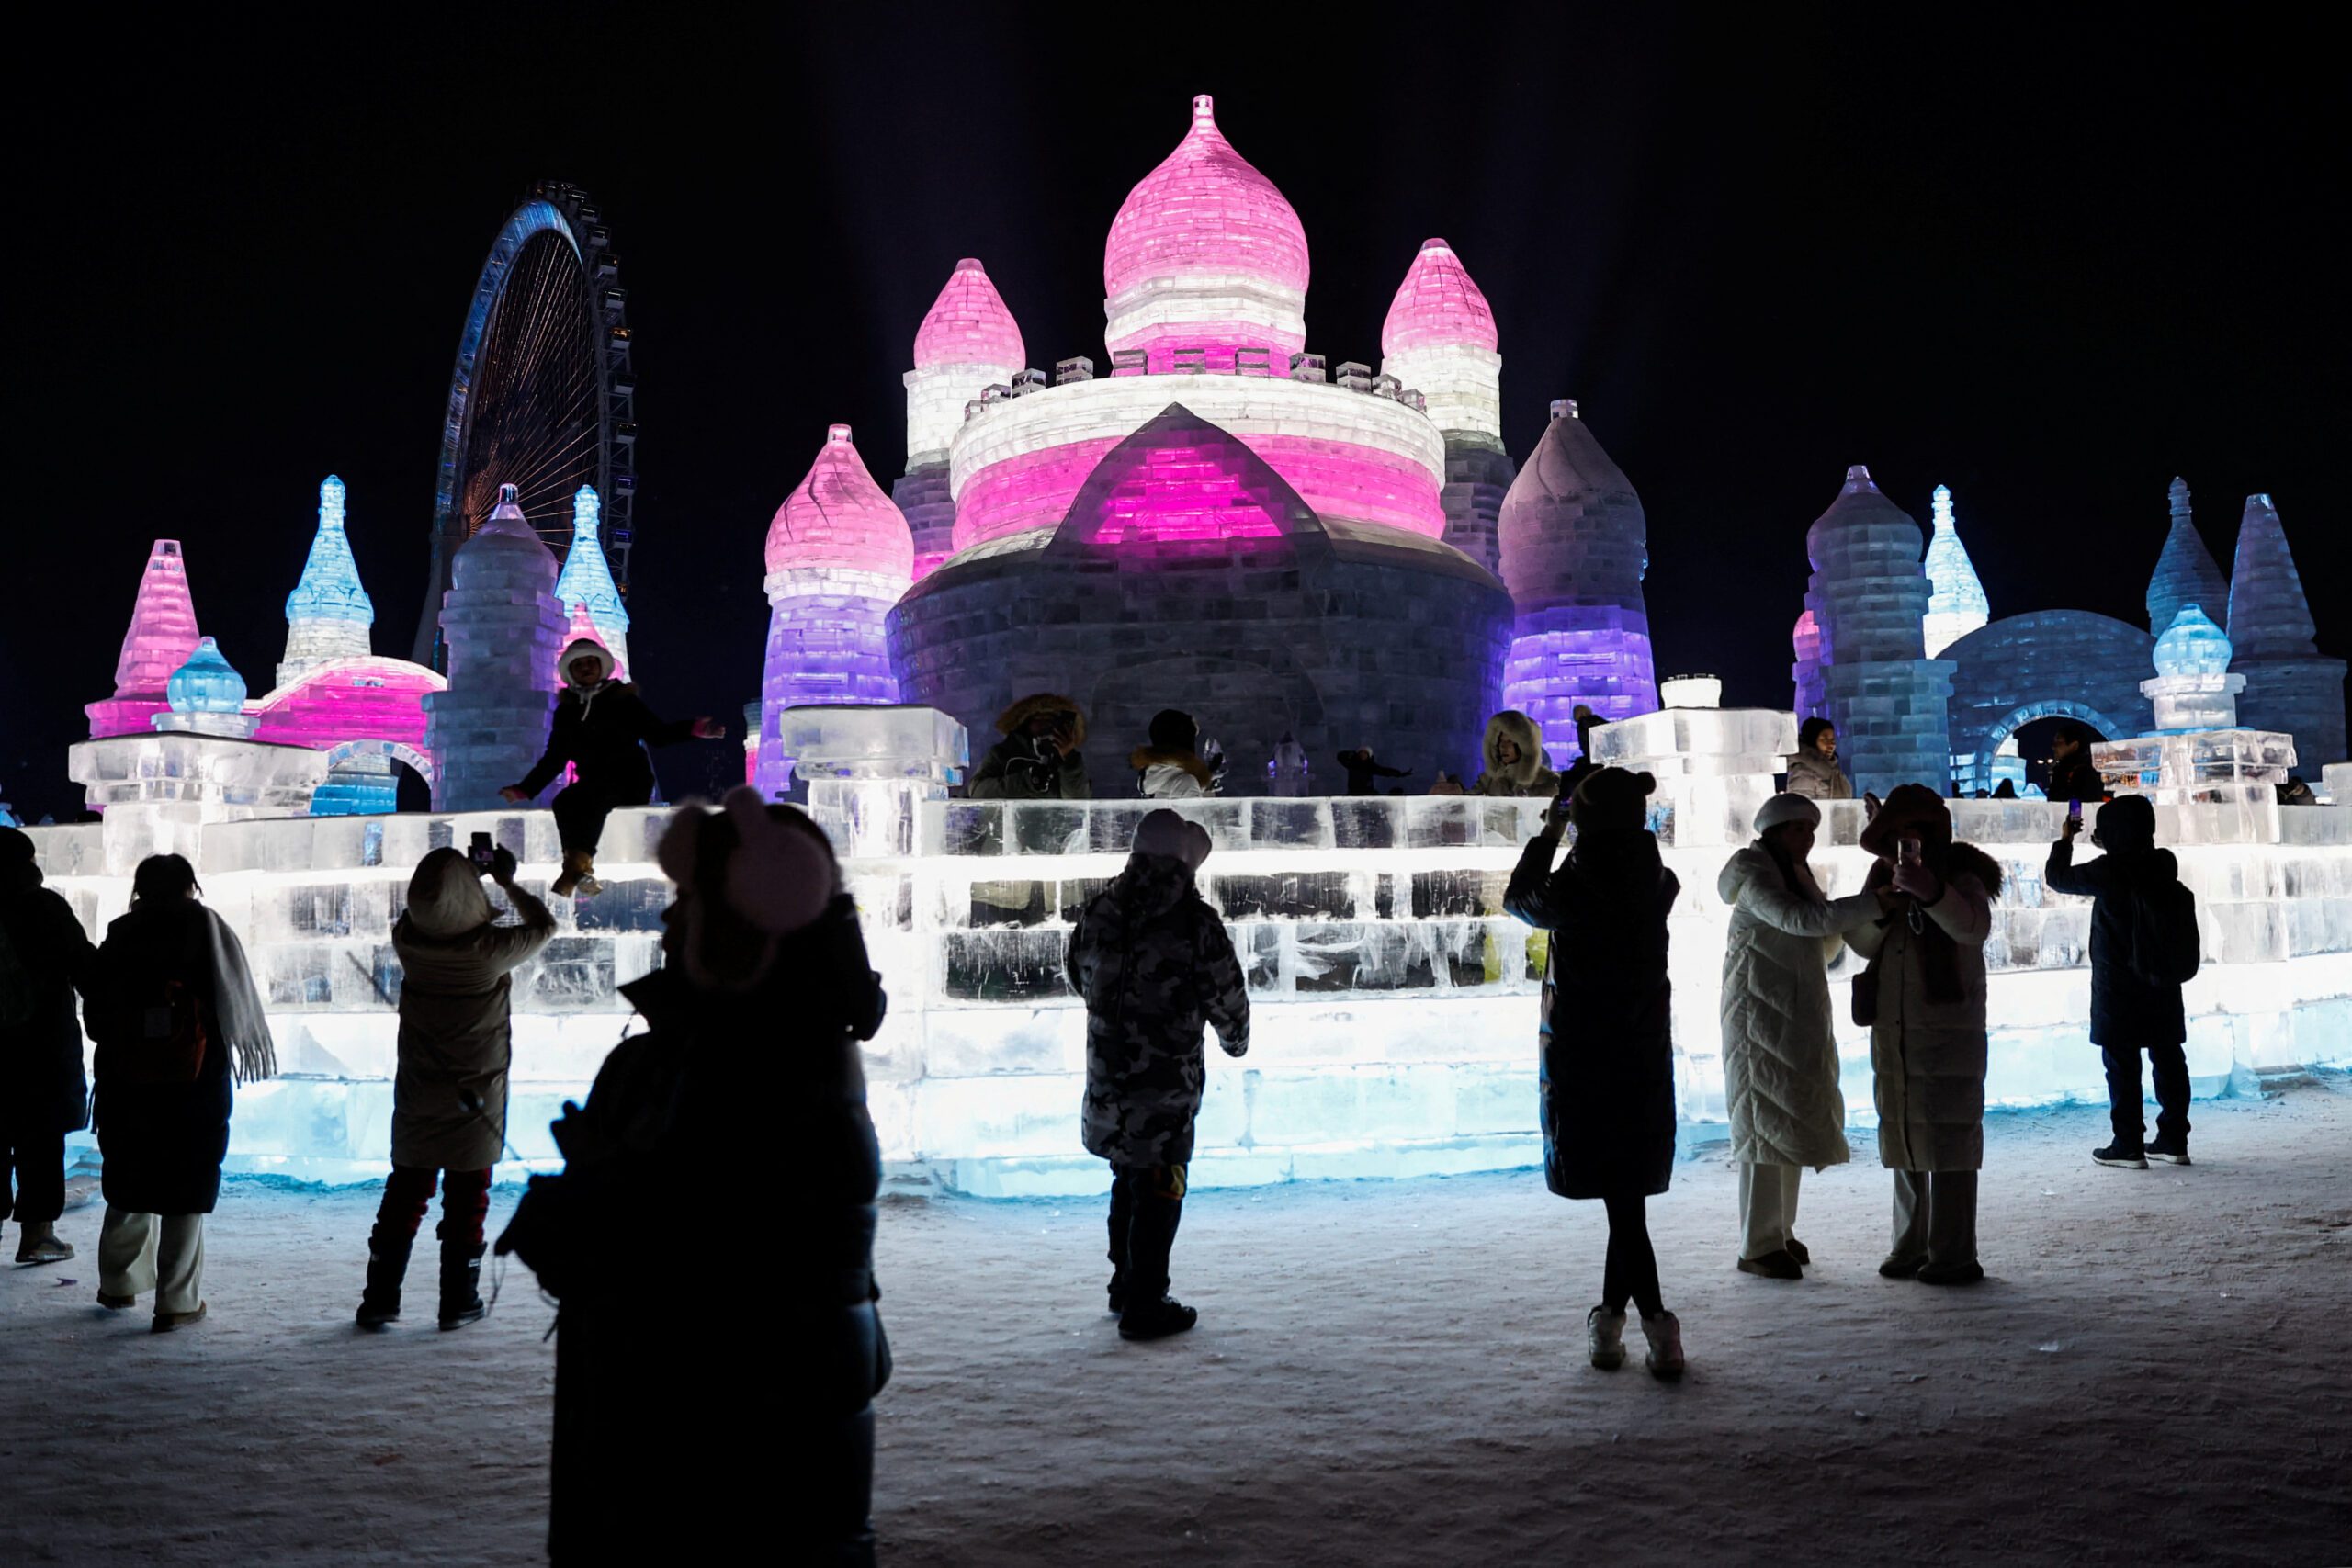 LOOK: Fairy-tale ice sculptures lure tourists into China’s Harbin